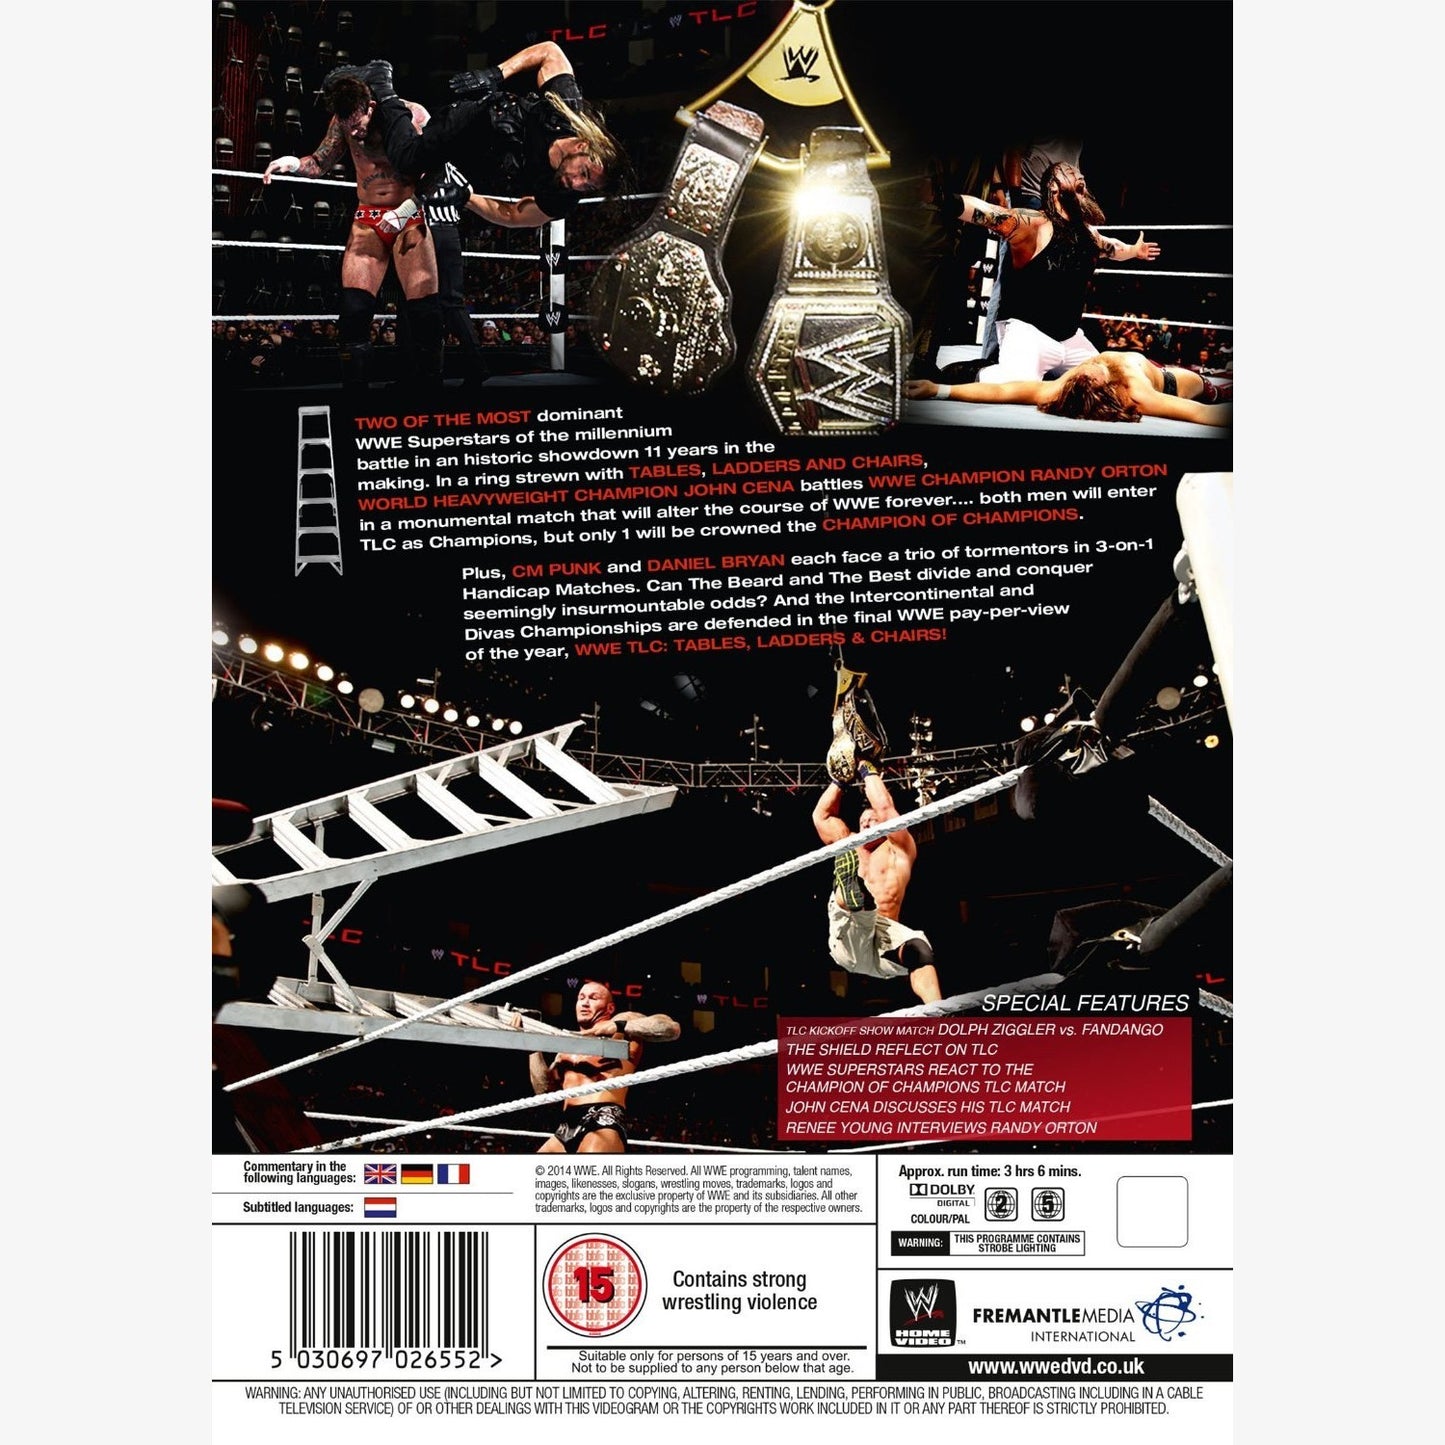 WWE TLC: Tables, Ladders & Chairs 2013 DVD